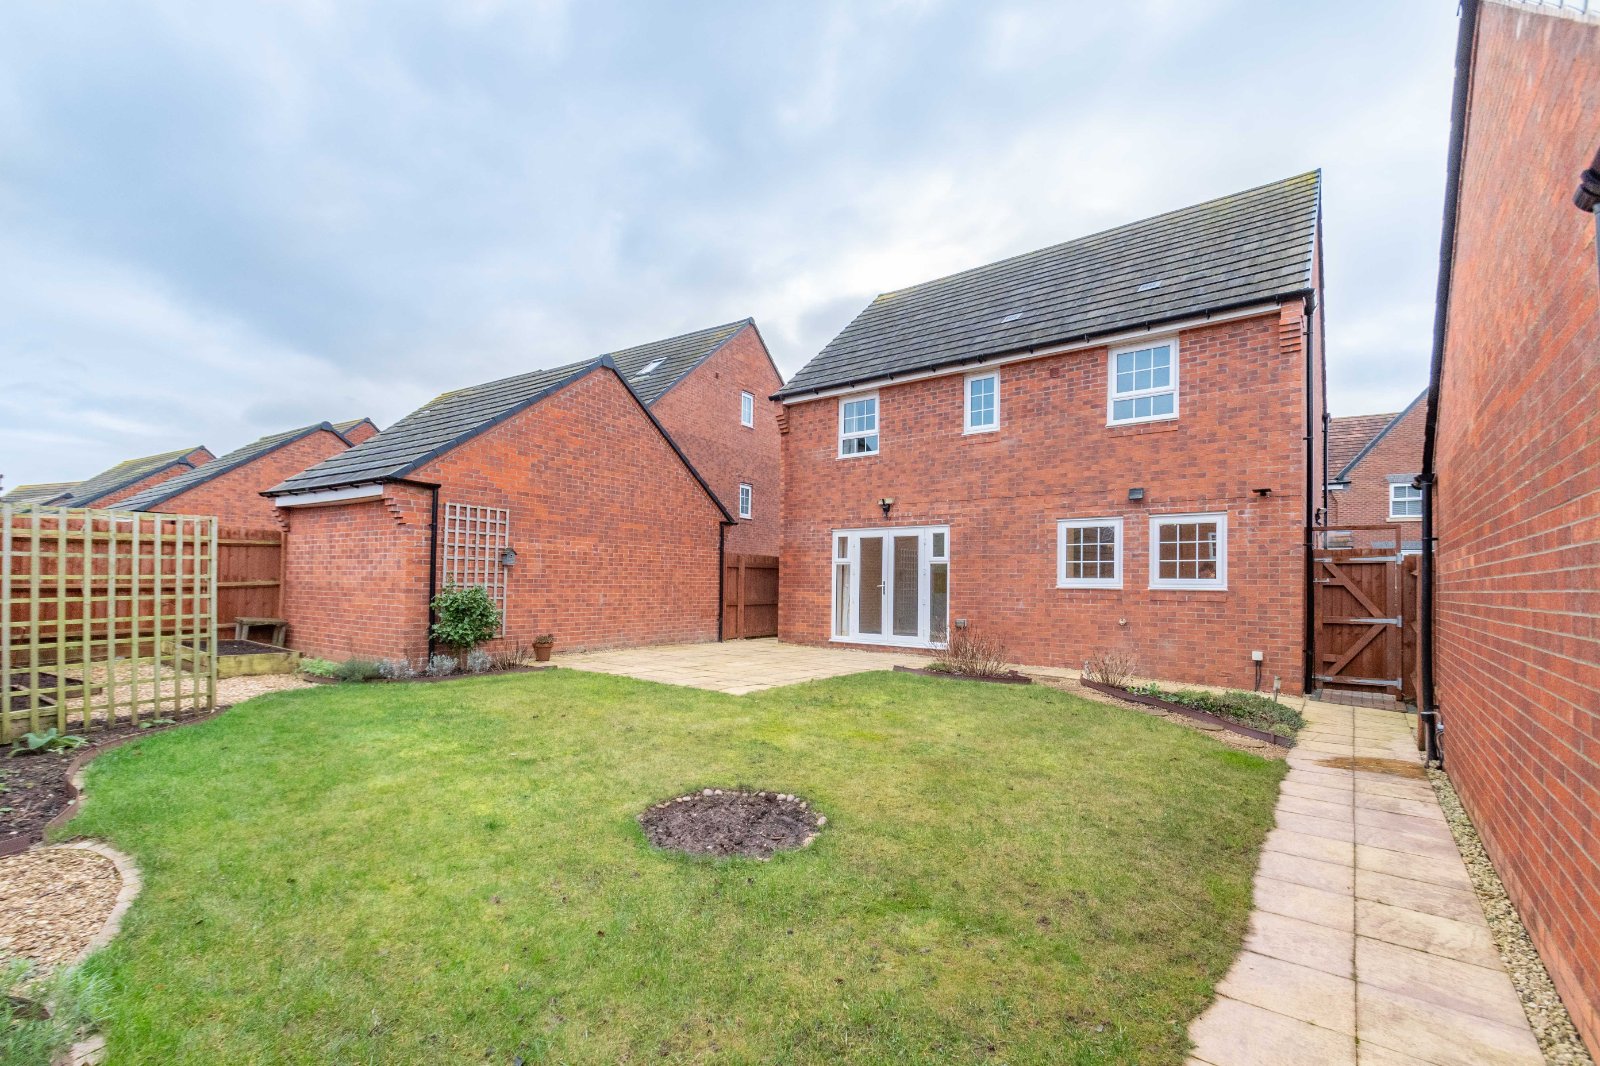 4 bed house for sale in Princethorpe Street, Bromsgrove 12